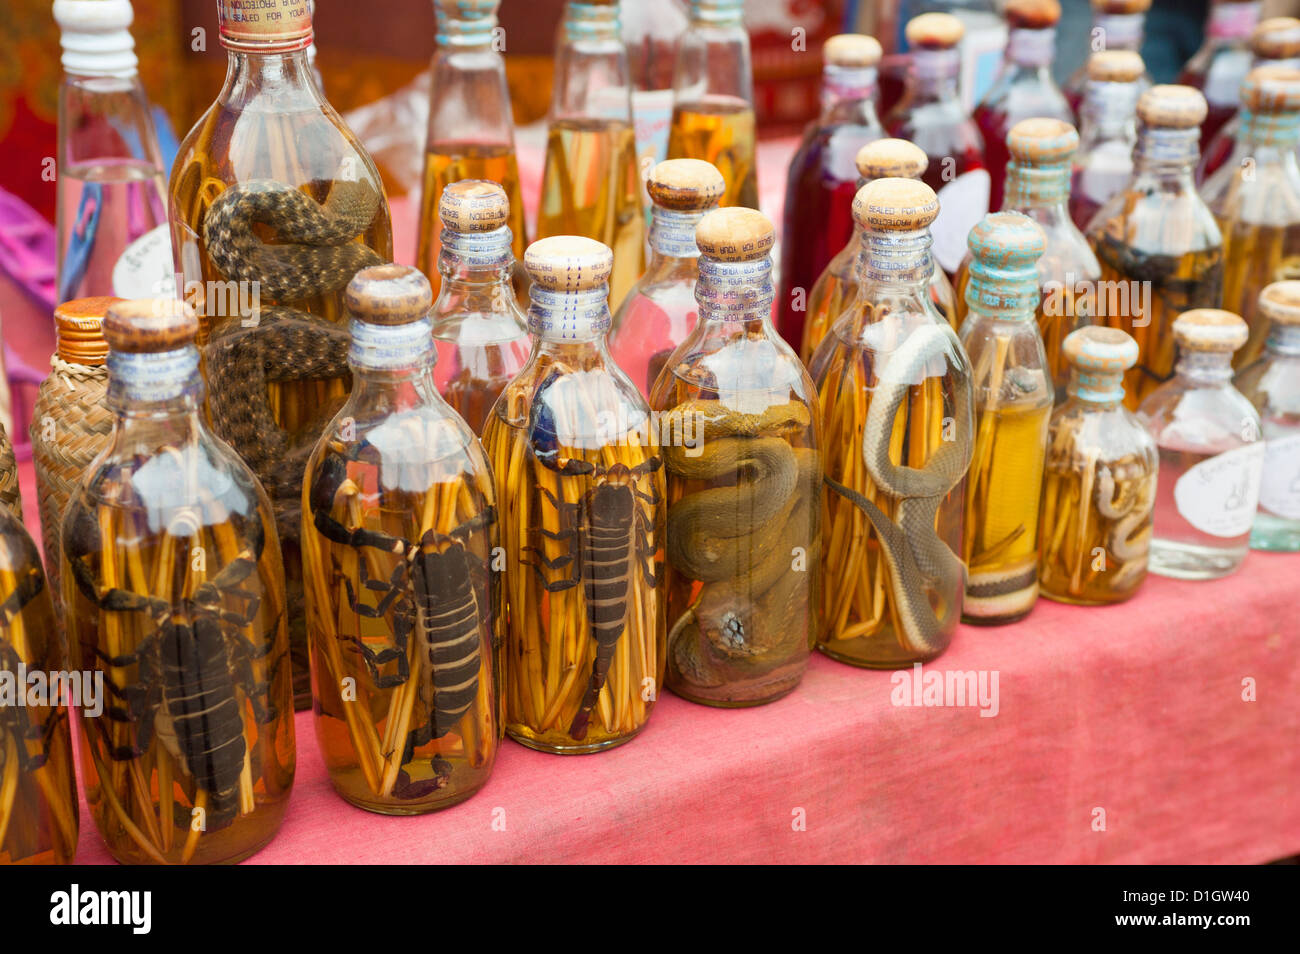 Rice wine bottles filled with lizards, Luang Prabang, Laos, Indochina, Southeast Asia, Asia Stock Photo